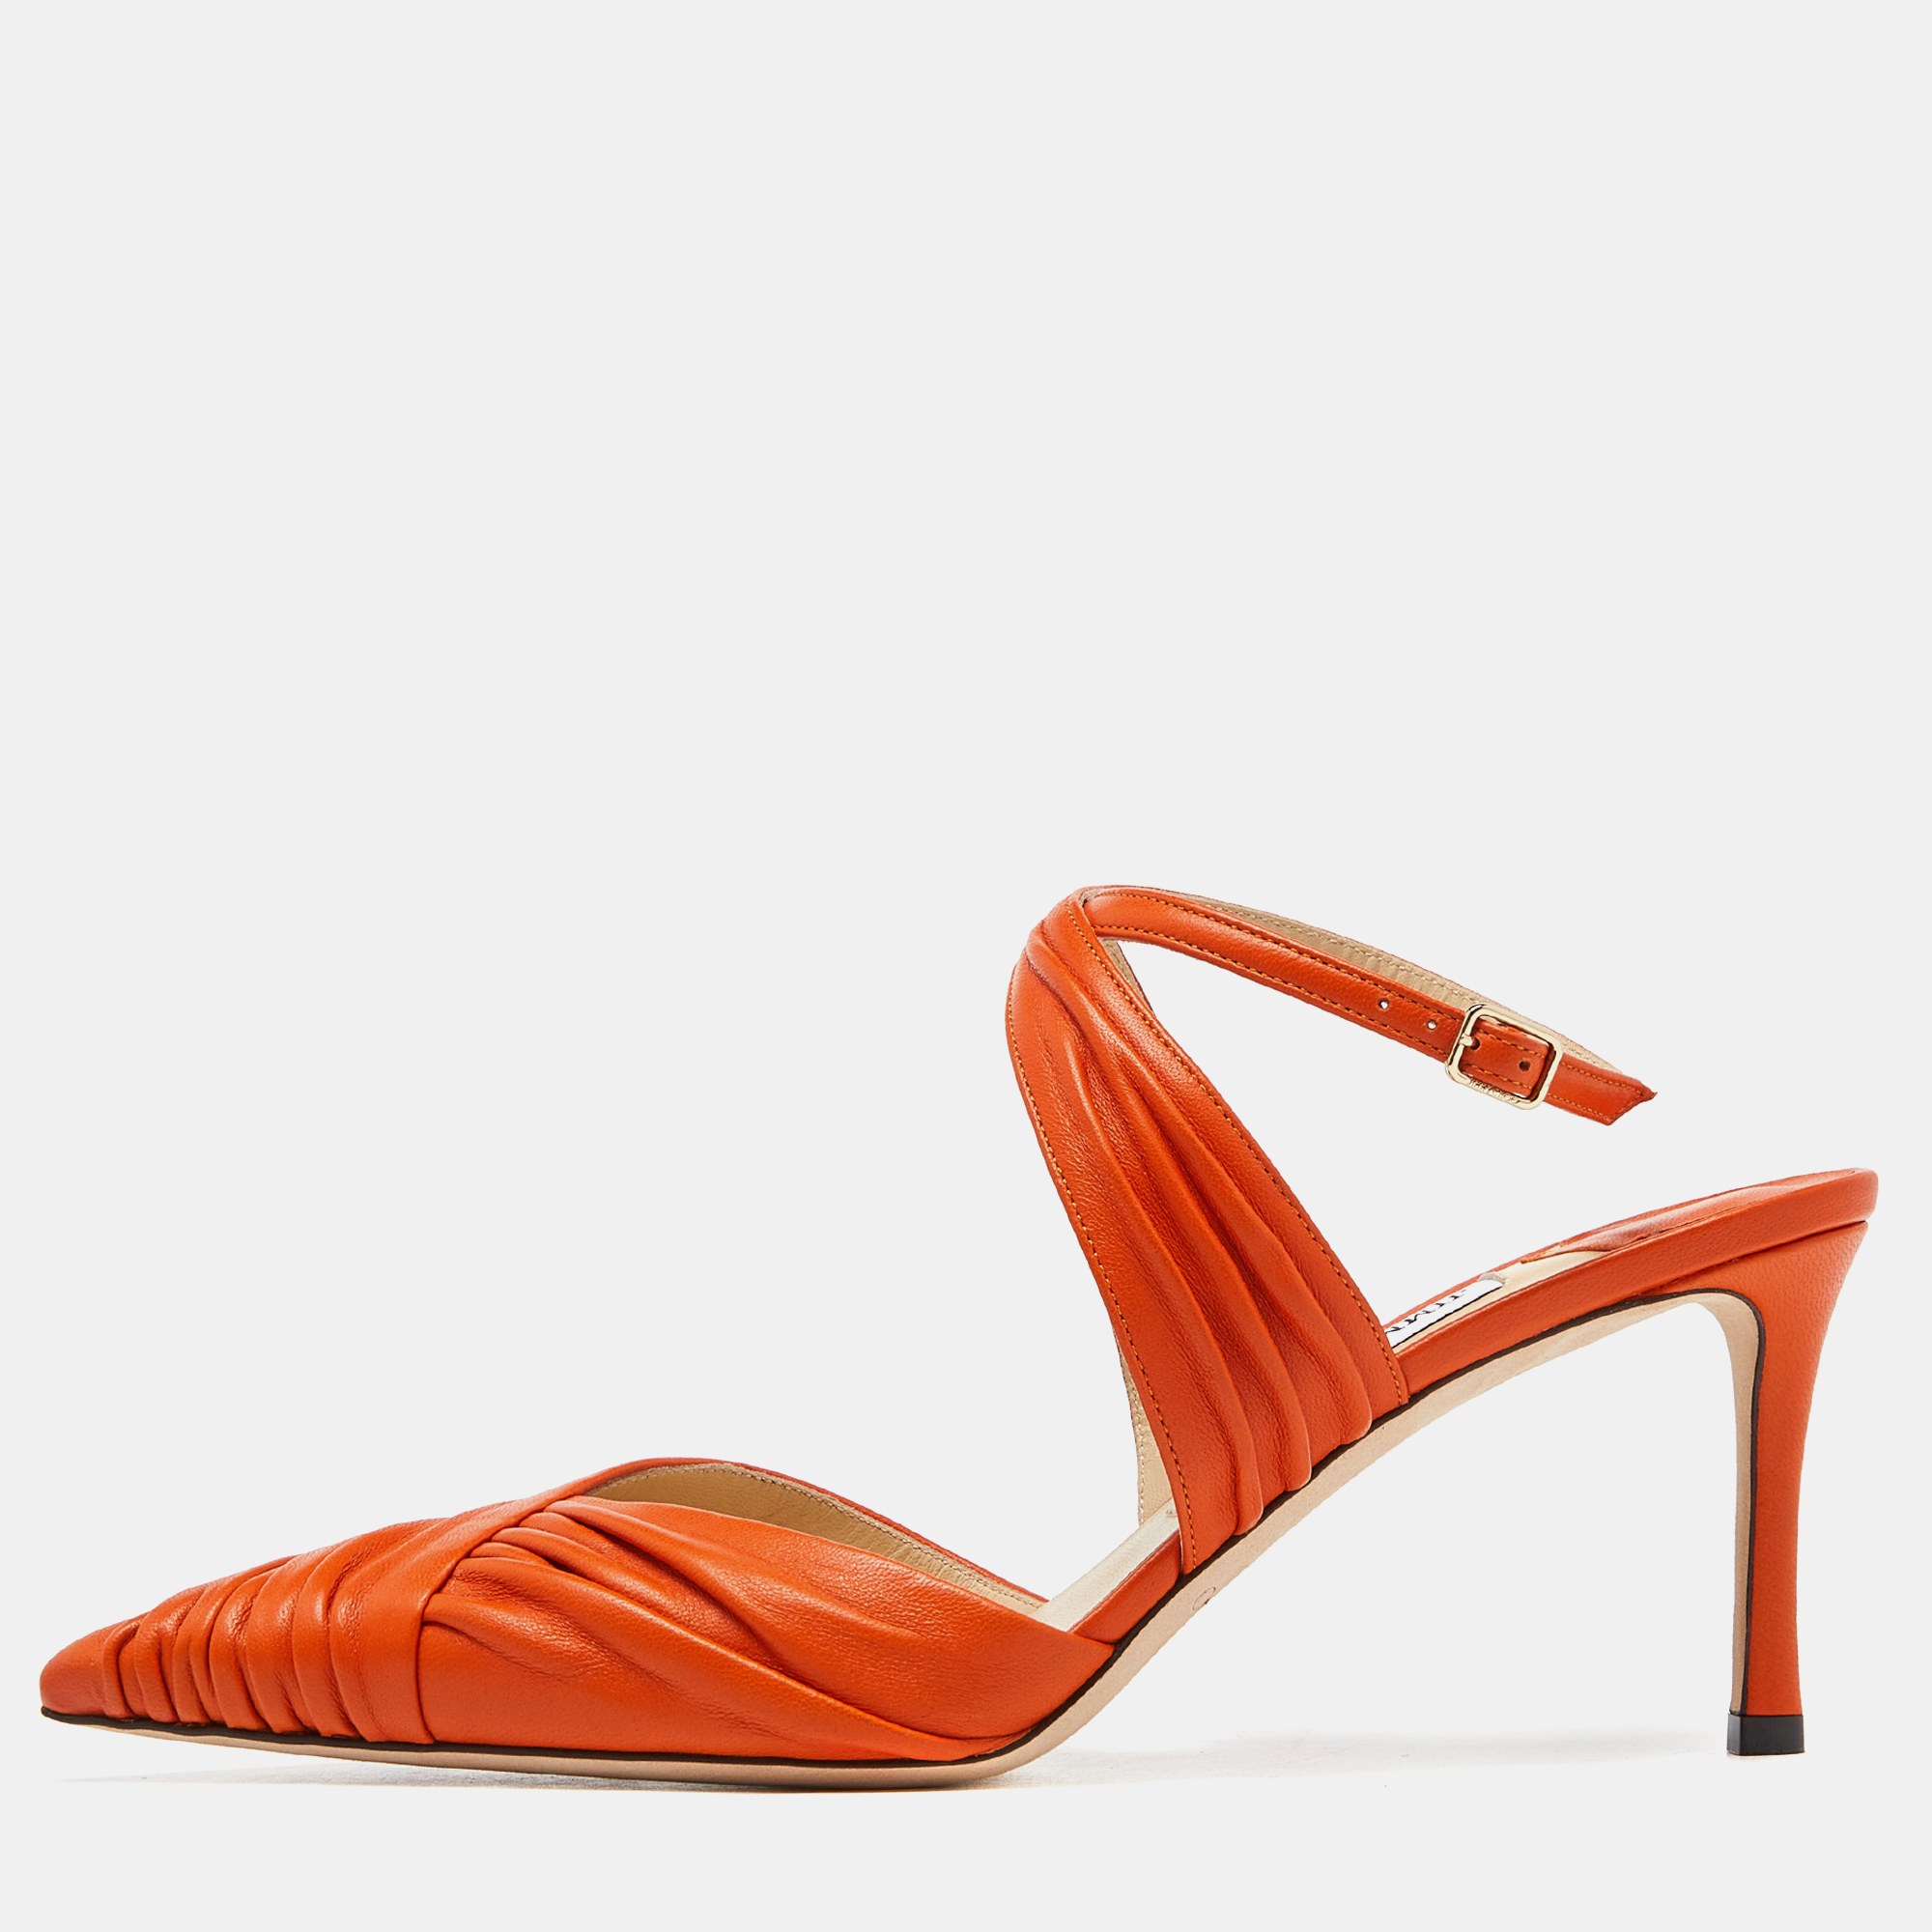 Pre-owned Jimmy Choo Orange Leather Pointed Toe Ankle Strap Pumps Size 39